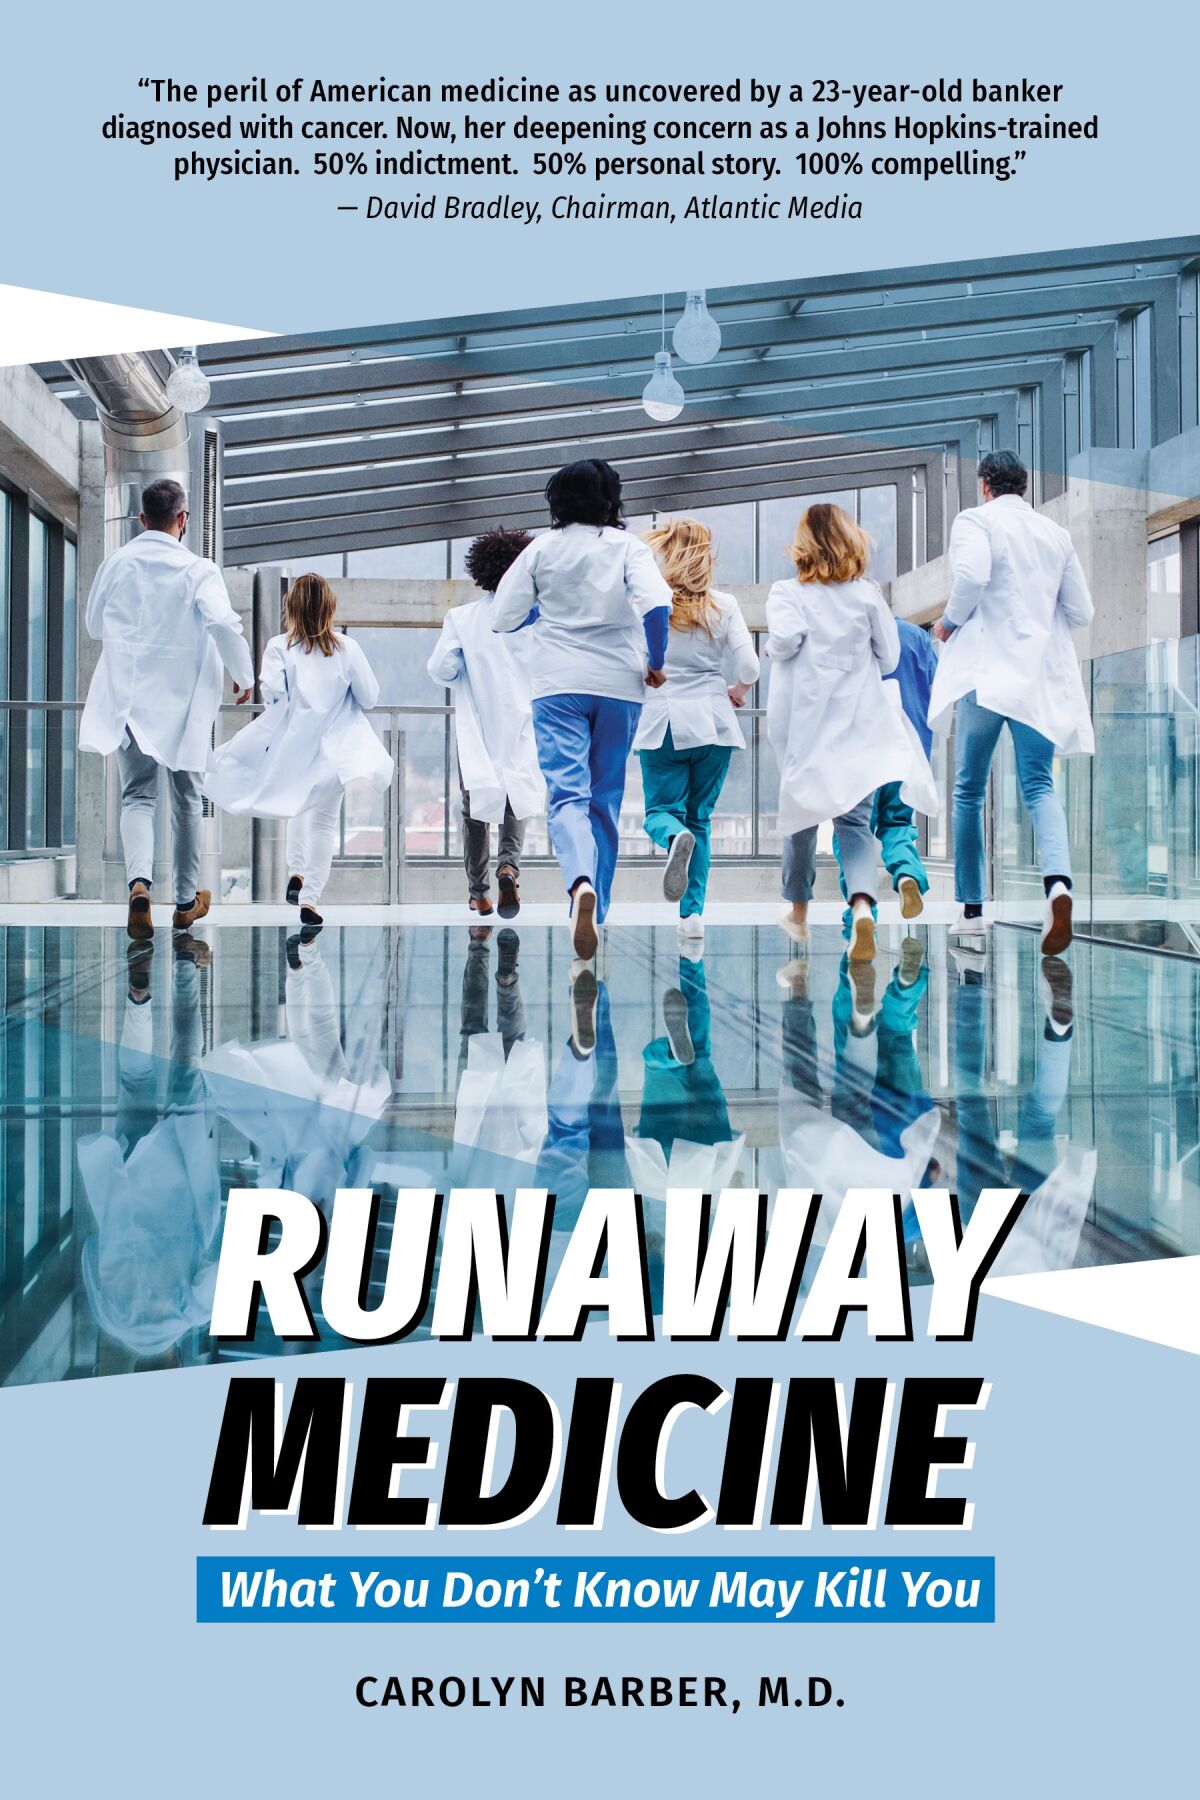 “Runaway Medicine: What You Don’t Know May Kill You” is a new book by La Jolla resident Carolyn Barber.